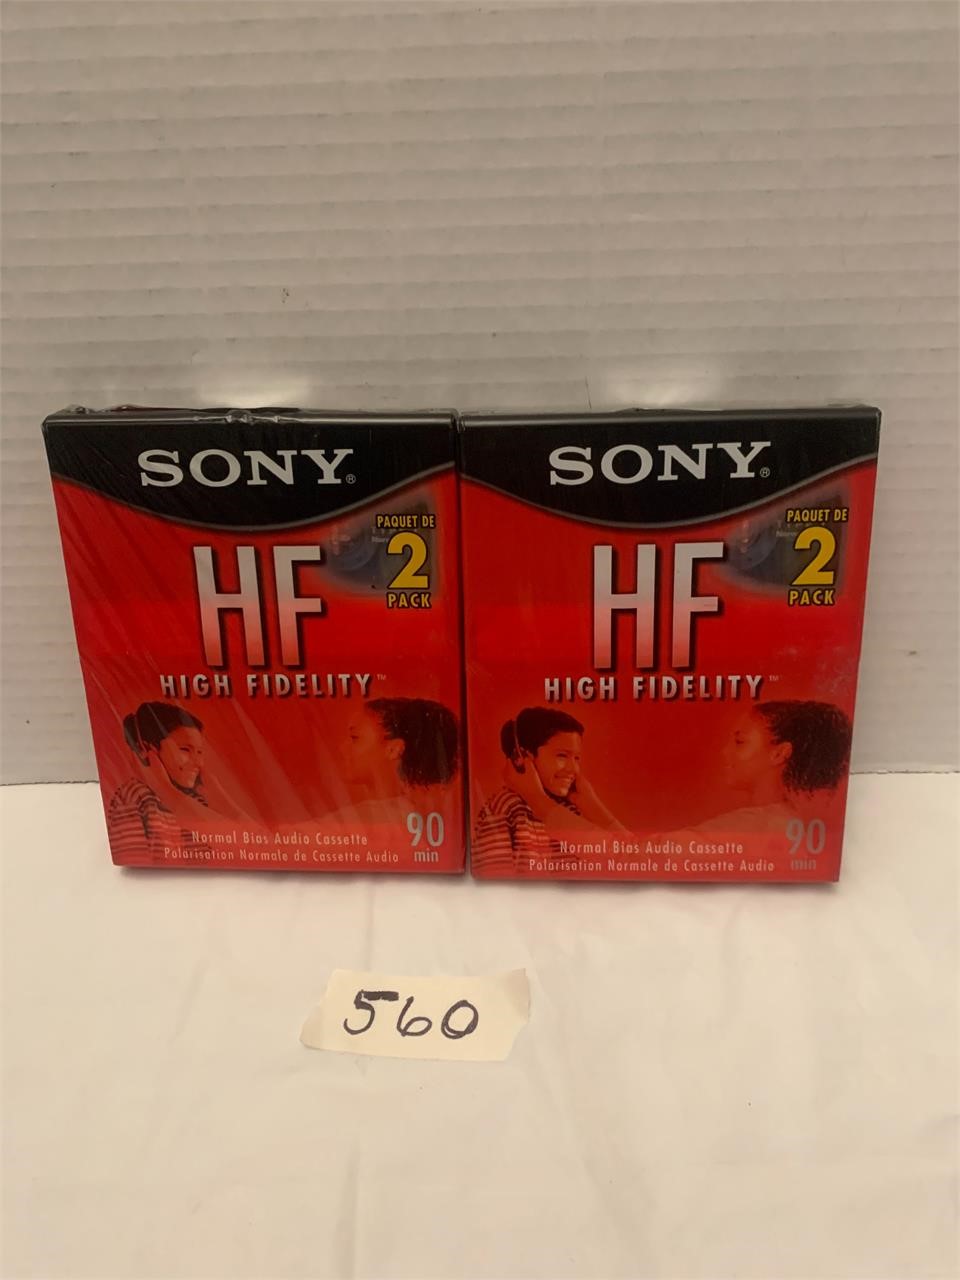 Sony HF 2 Pack lot of 2 Sealed New